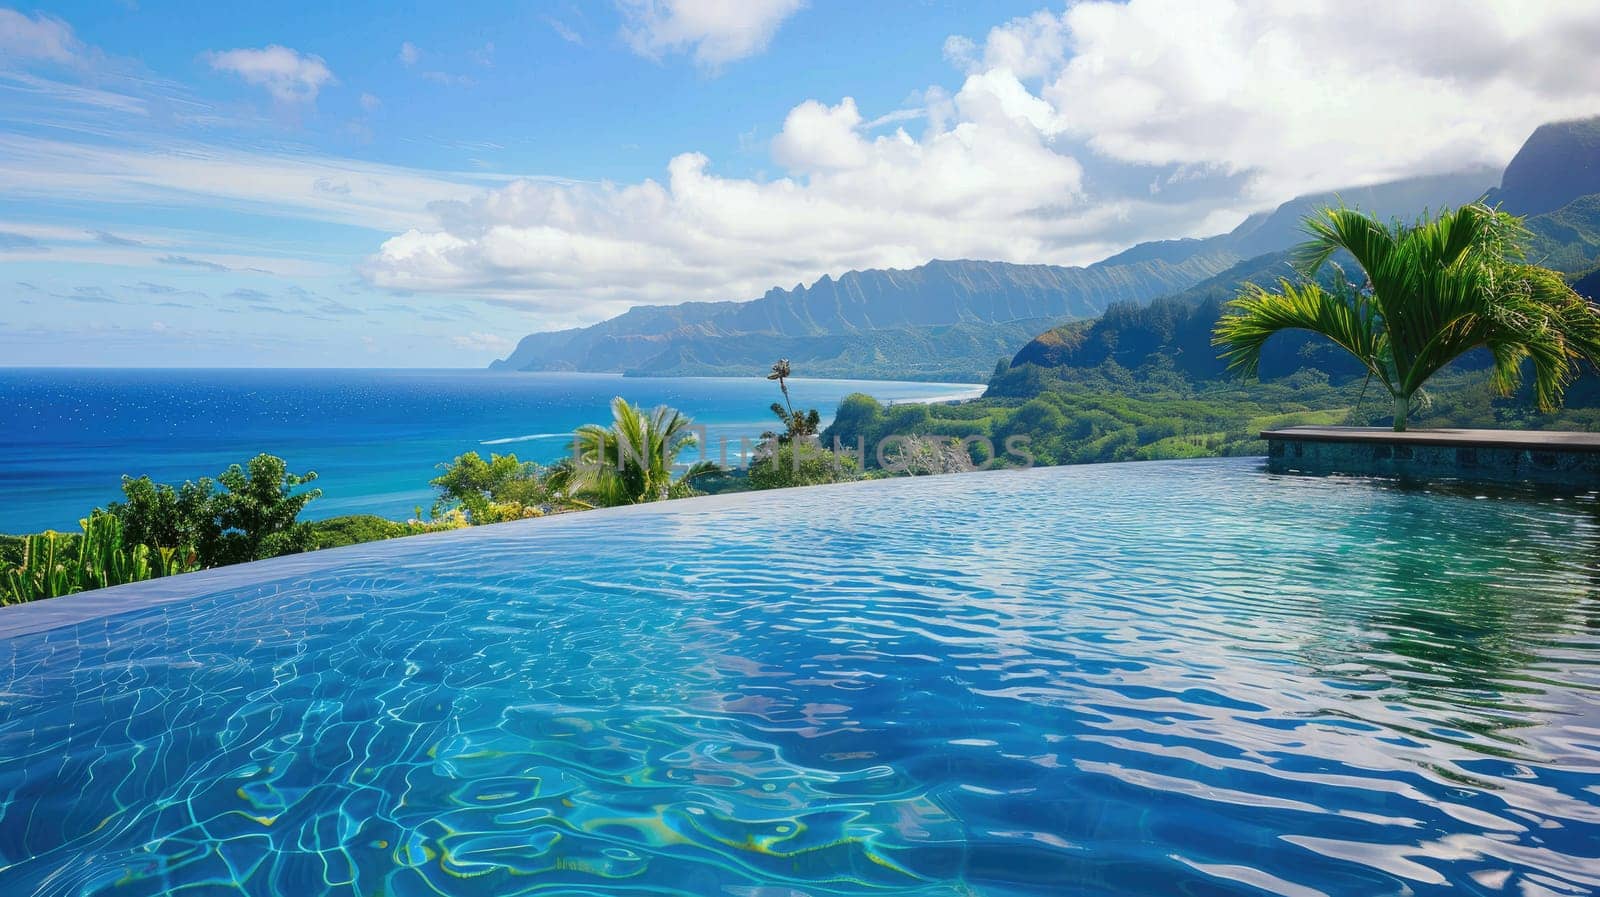 A wide shot of an infinity pool overlooking a stunning landscape, like mountains or the ocean